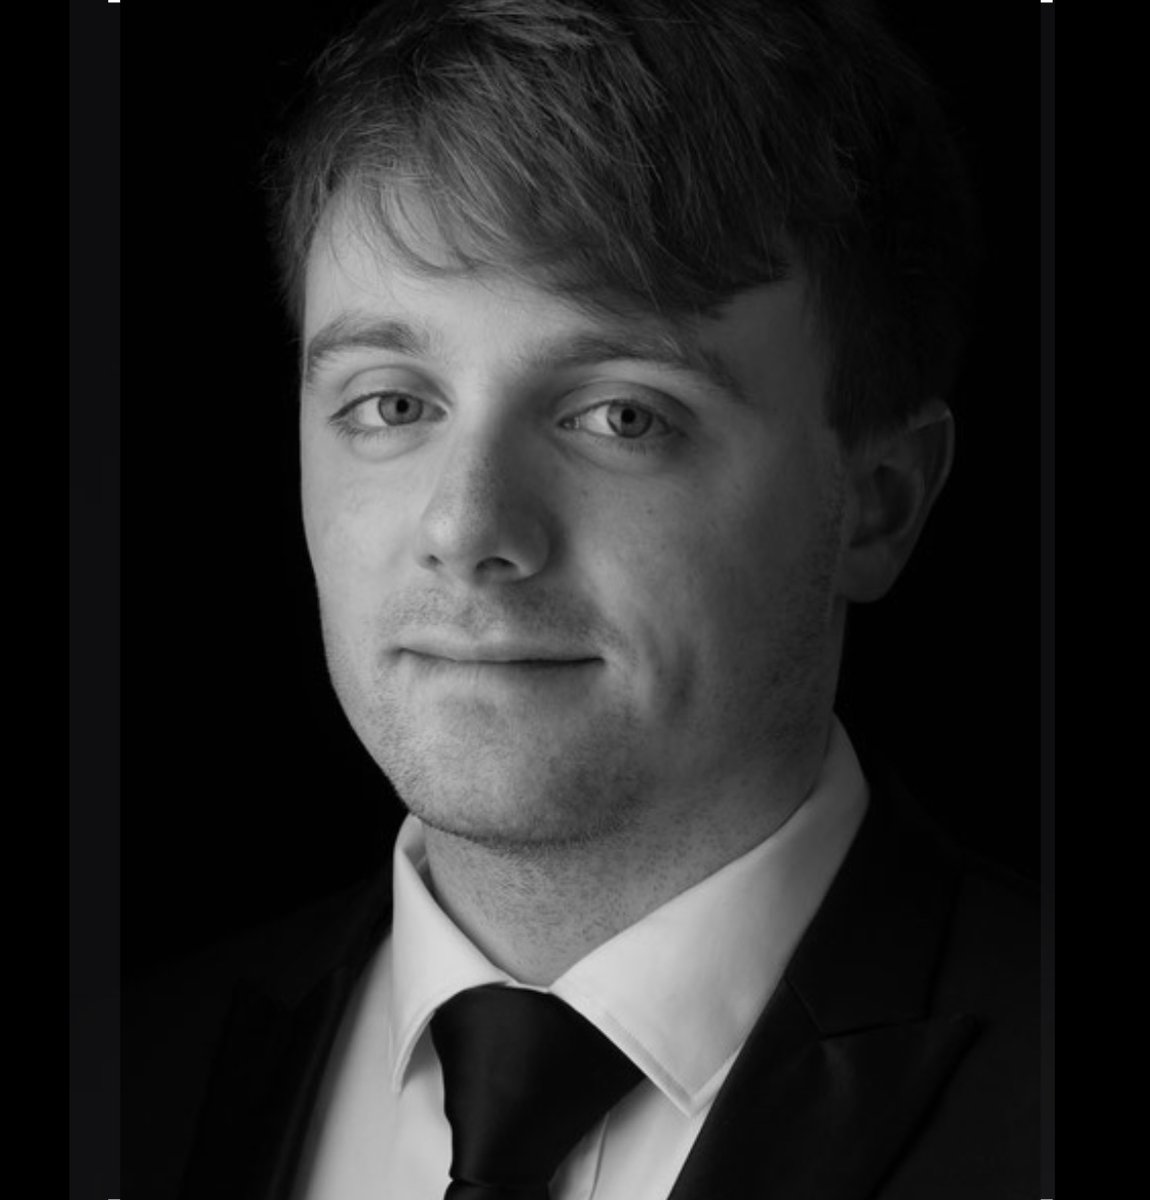 TU Dublin former piano student, Killian Farrell, makes his Irish National Opera debut tonight conducting Verdi's 'La Traviata' in the National Opera House, Wexford. Wishing him, cast and orchestra the very best of luck. Toi toi also to all our Conservatoire singers in the chorus!